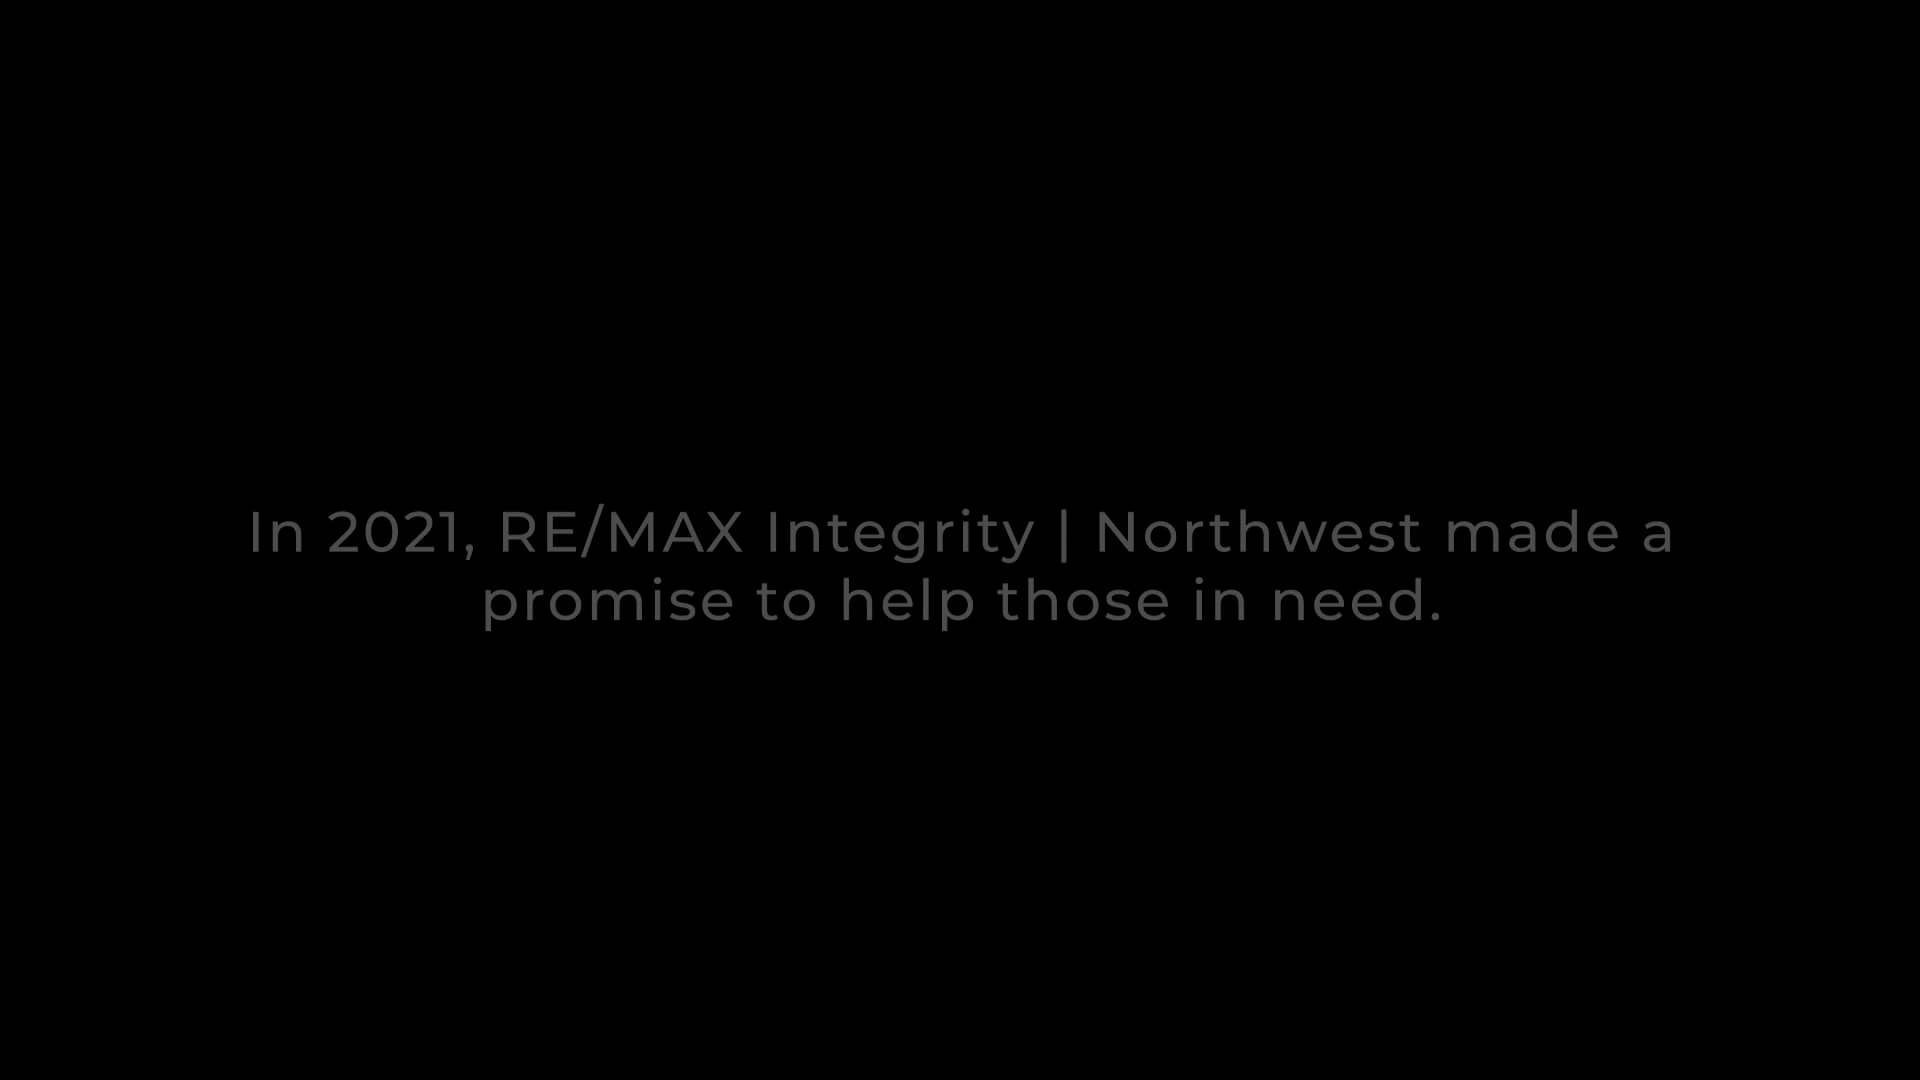 RE/MAX Integrity Northwest Charitable Giving 2021 on Vimeo